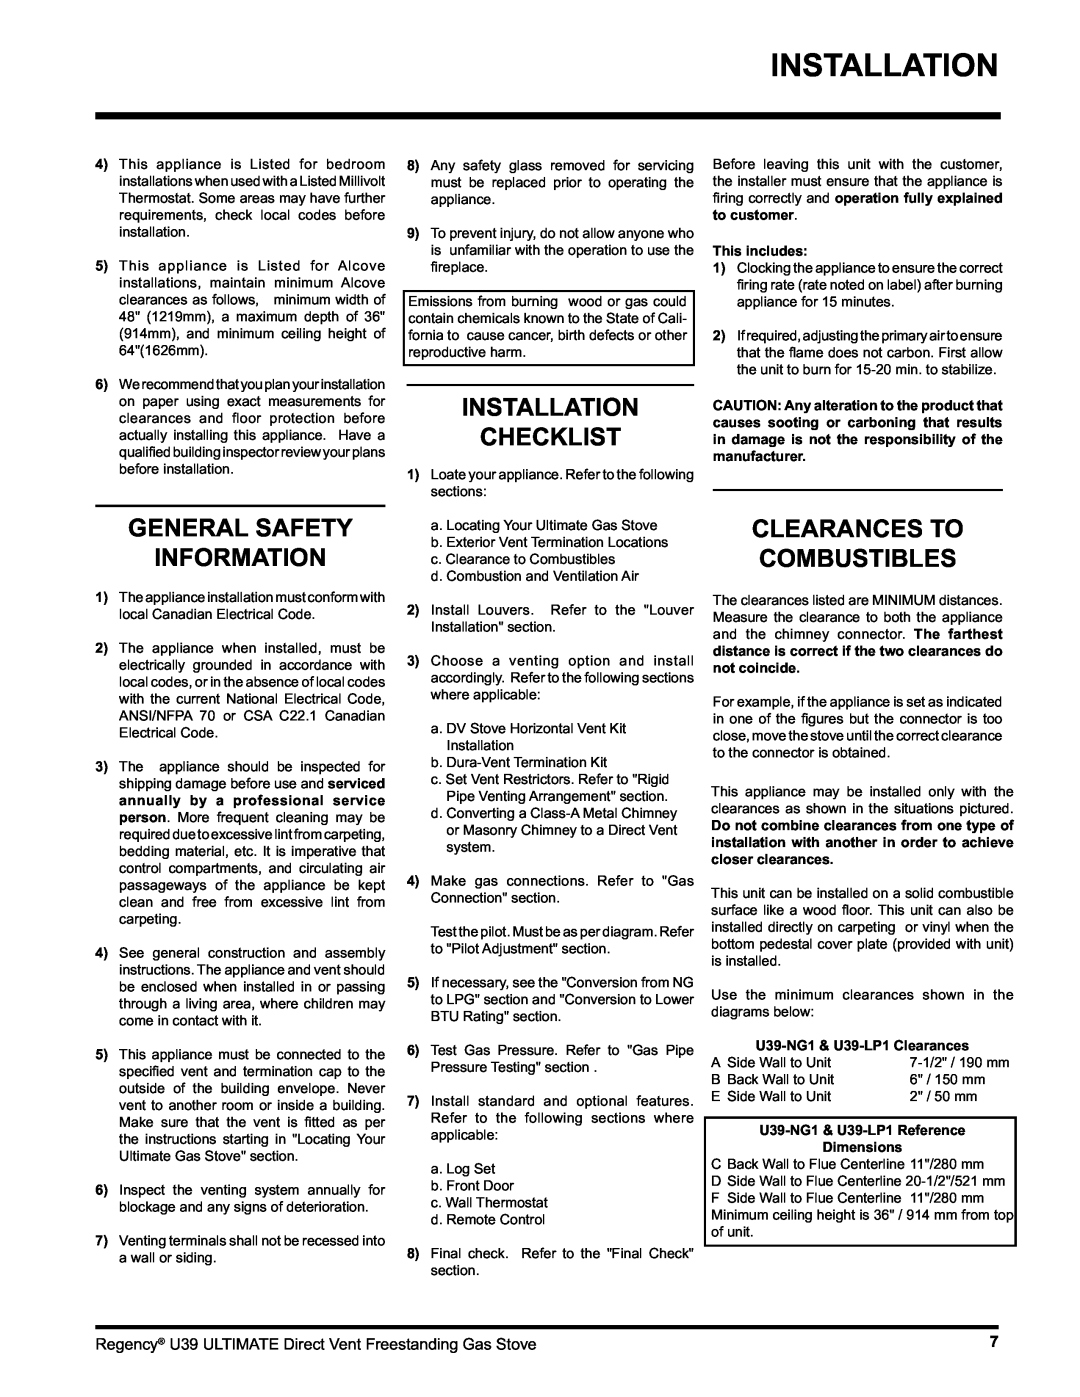 Regency U39-NG1, U39-LP1 Installation Checklist, General Safety Information, Clearances To Combustibles, This includes 